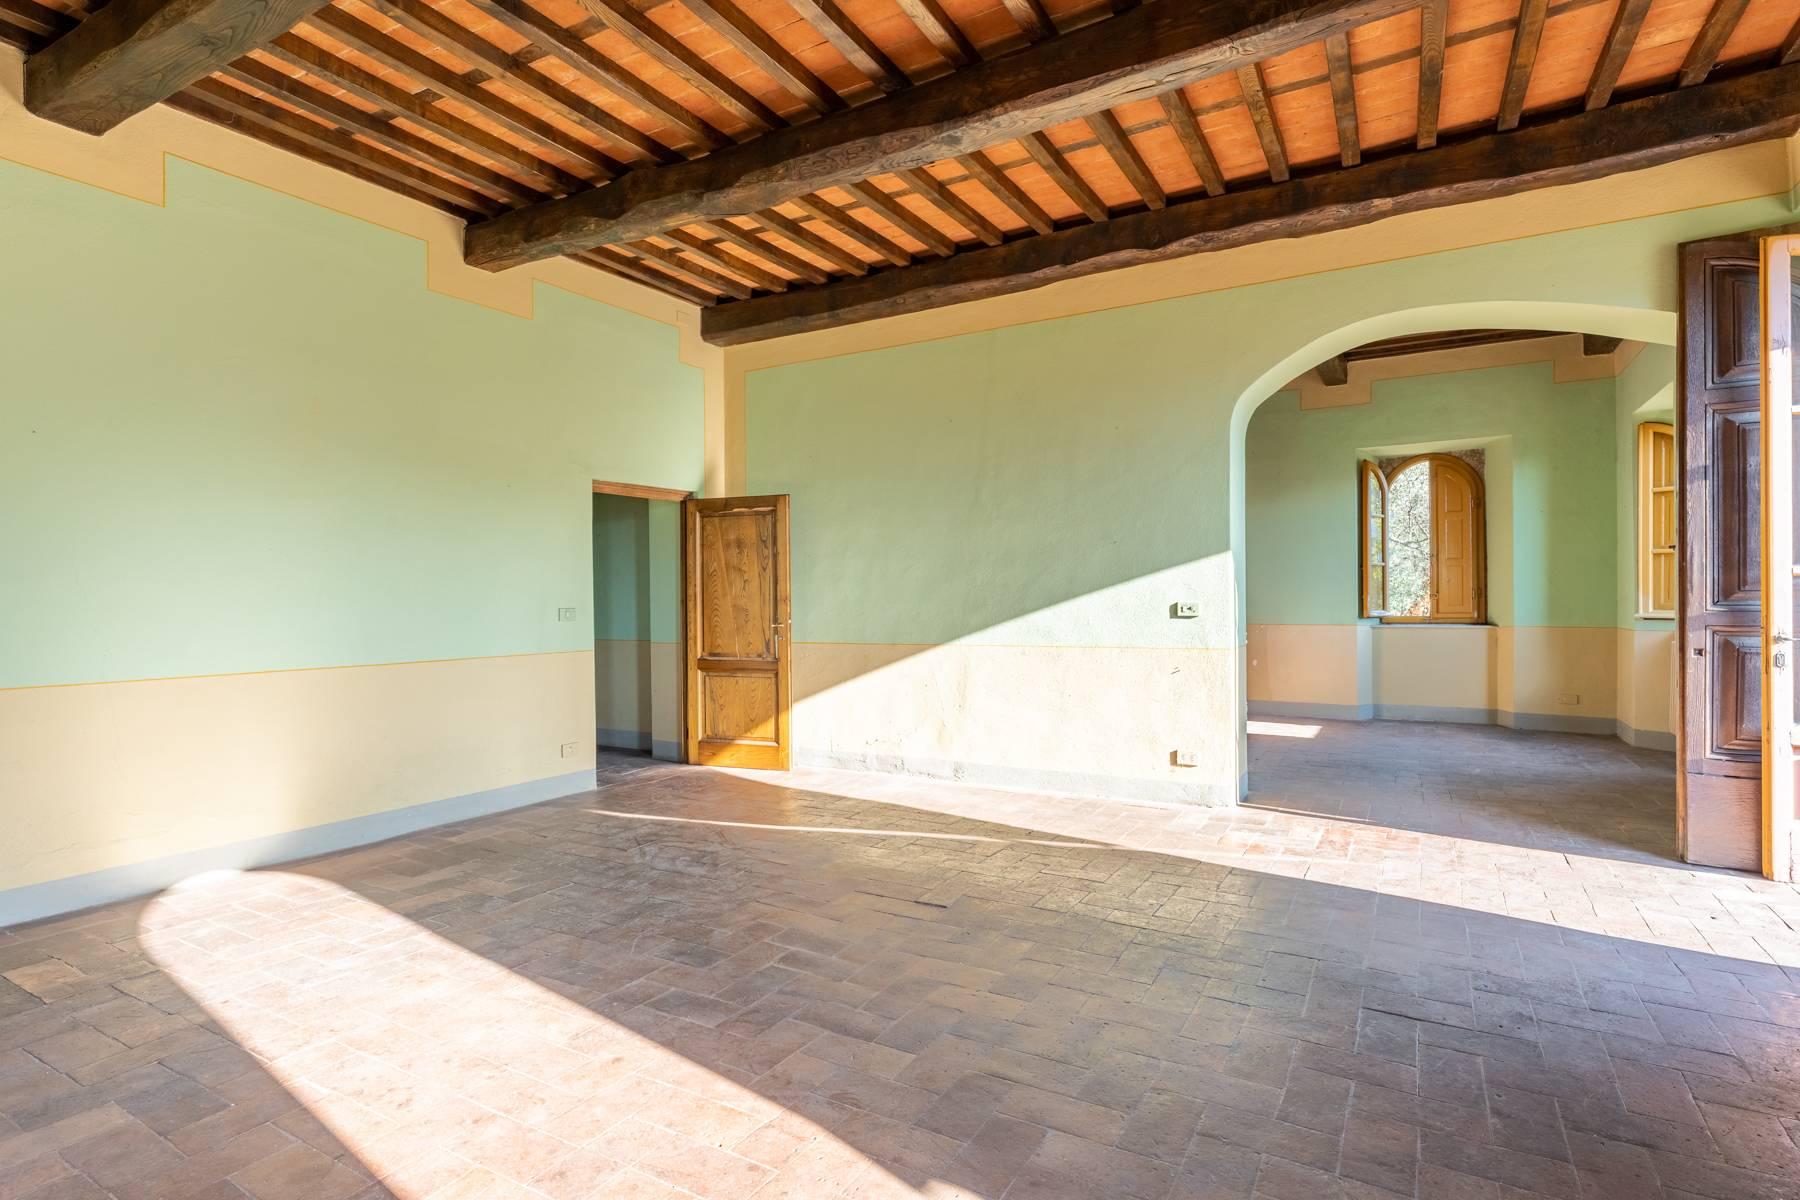 Superb villa with breathtaking views of the Lucca countryside - 17